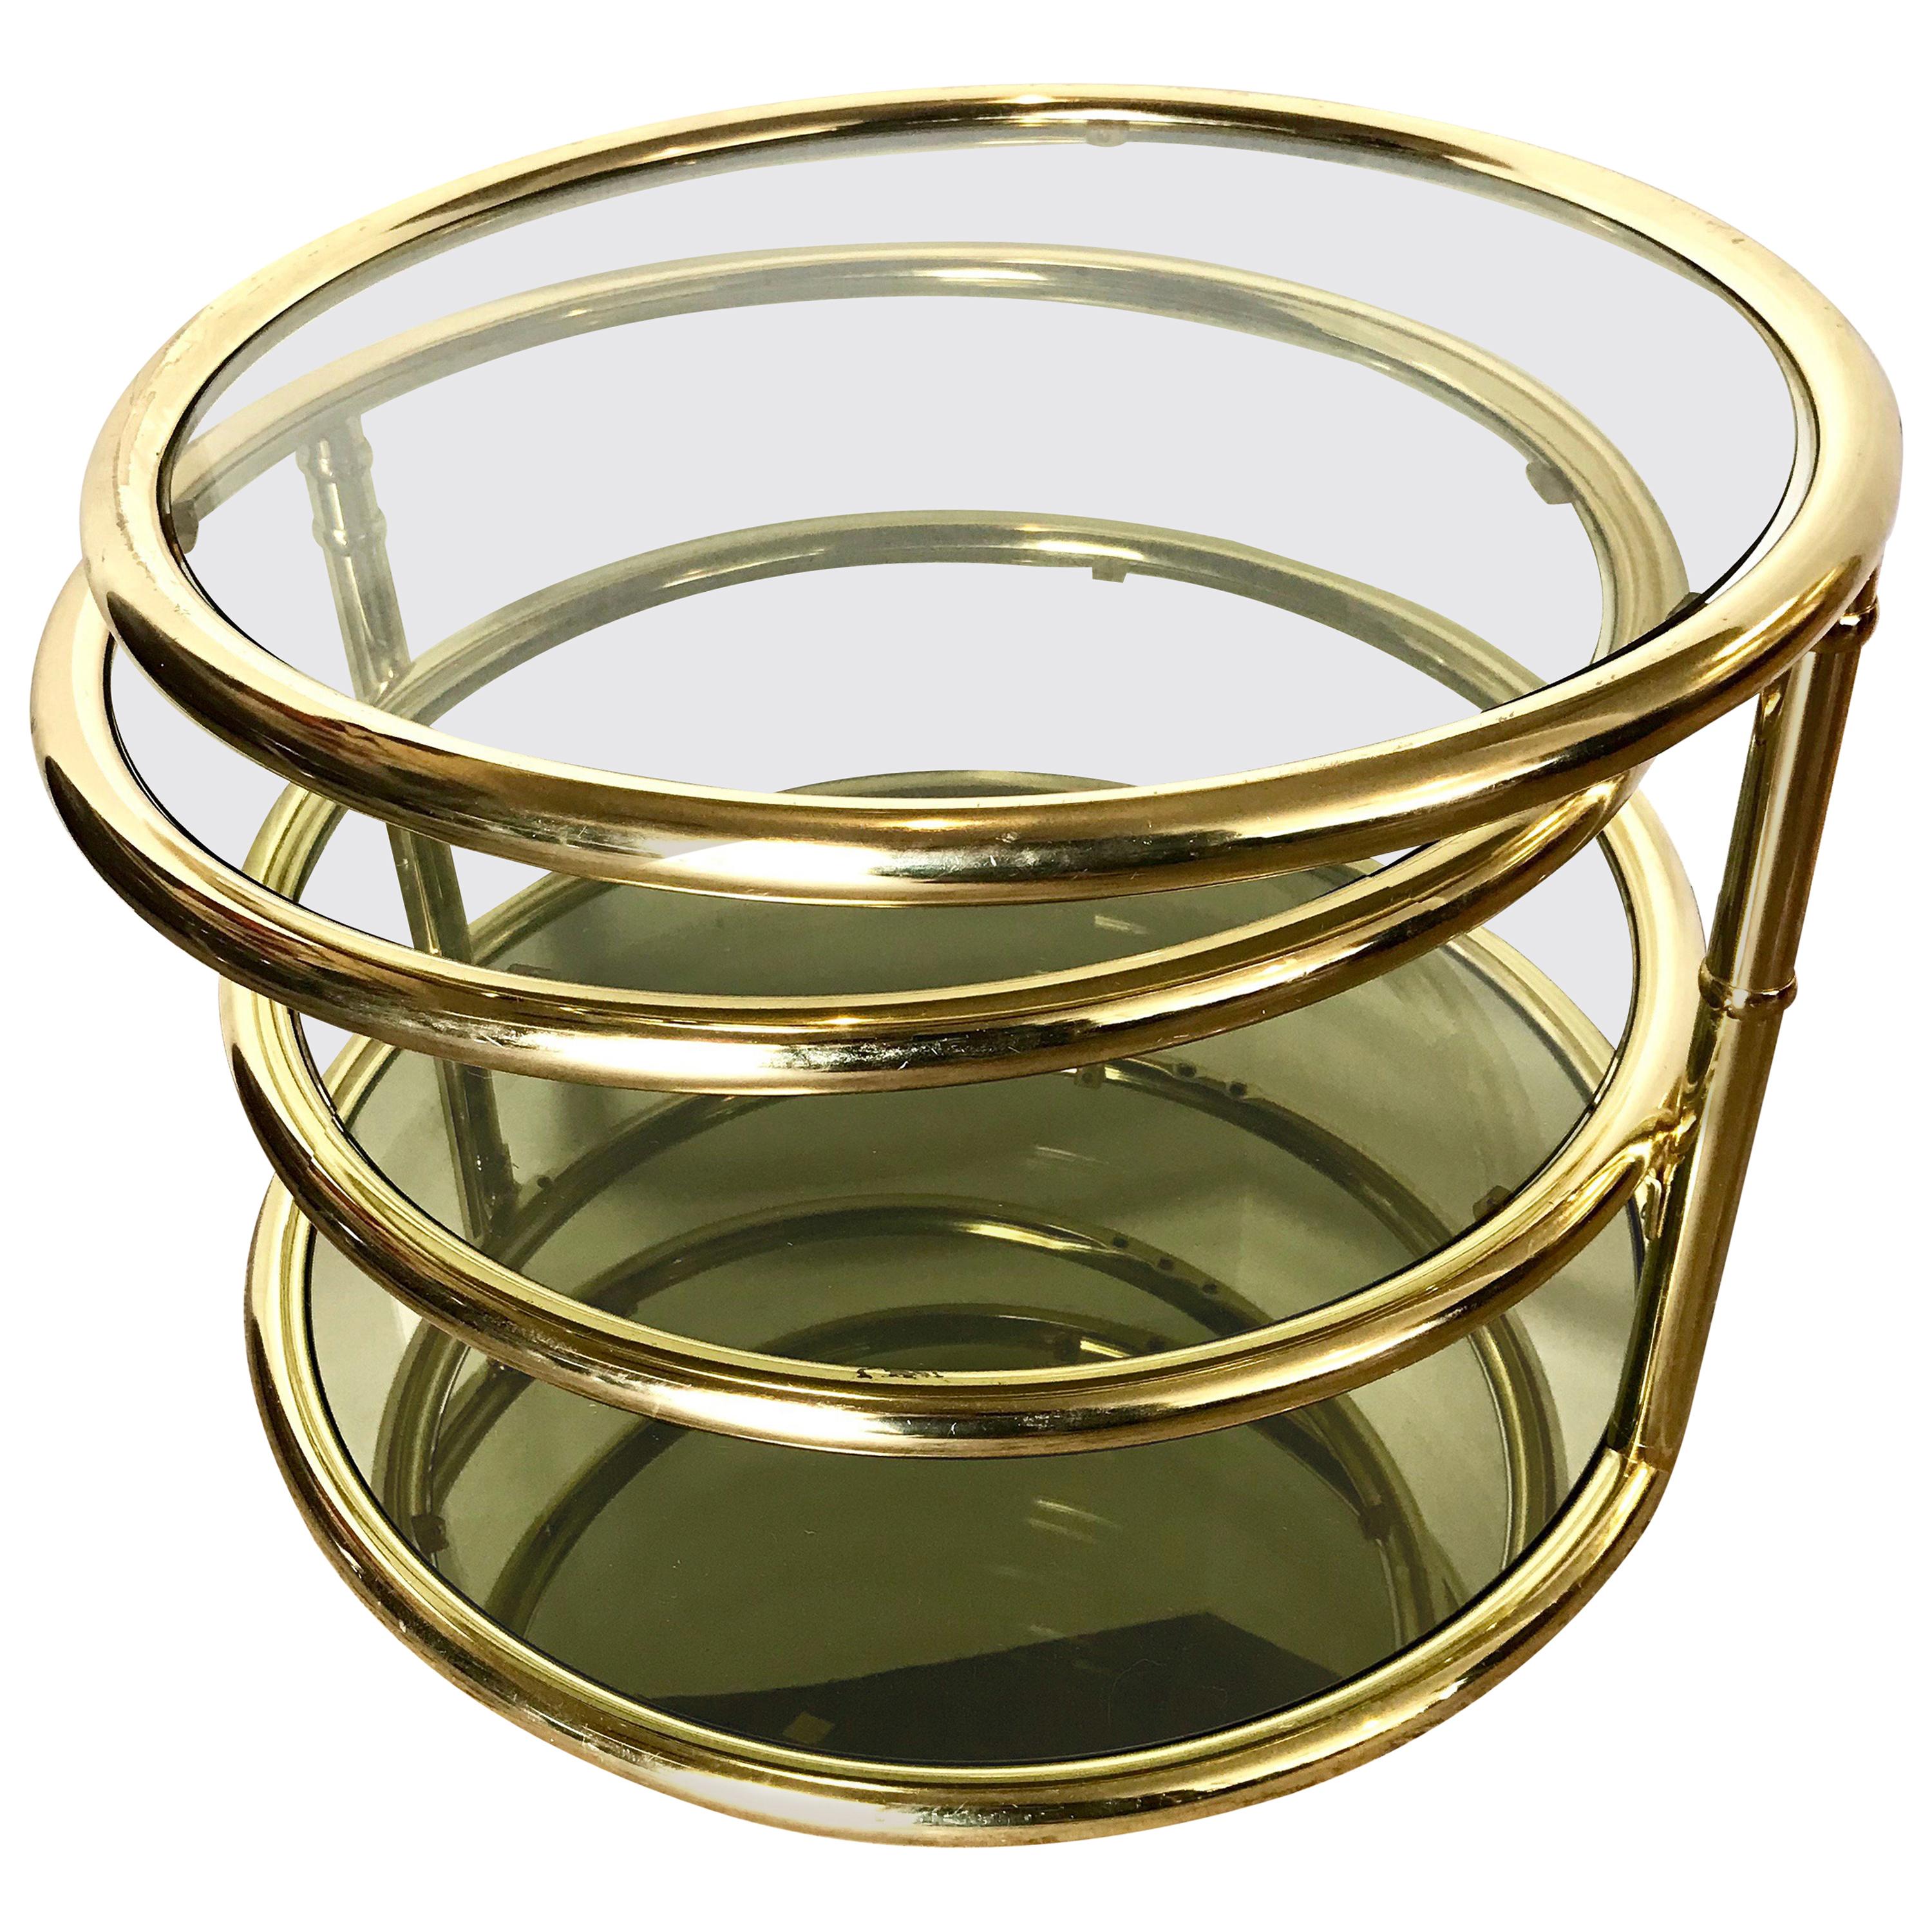 Milo Baughman Round Disc Four Tiered Brass and Glass Floating Cocktail Table DIA